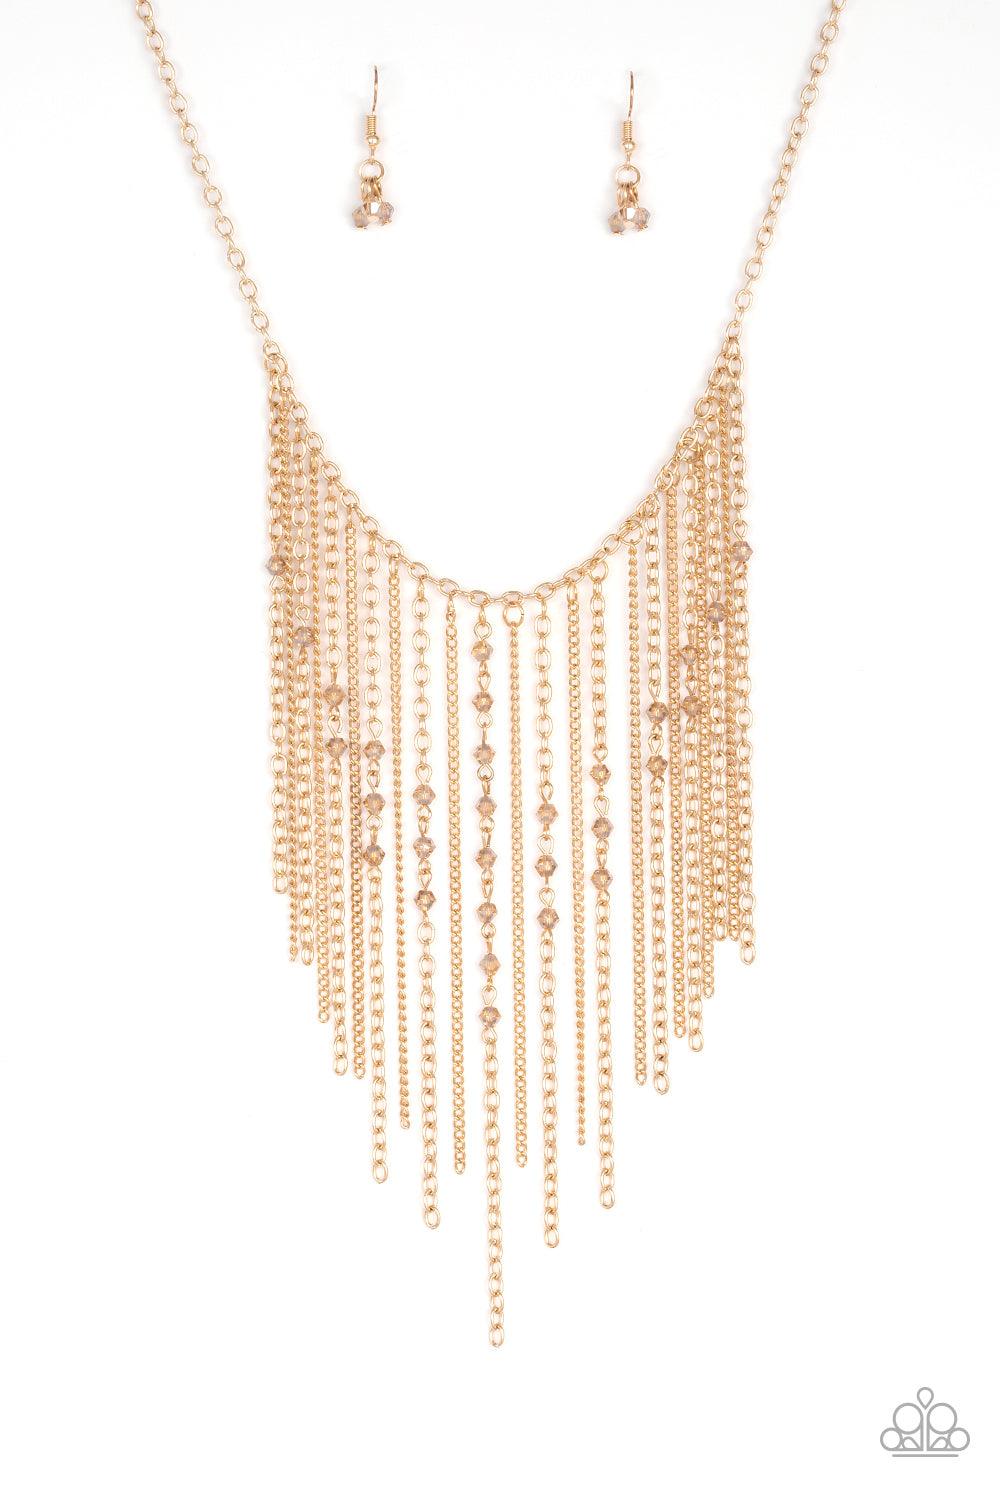 Paparazzi Accessories First Class Fringe - Gold Varying in length, mismatched gold chains stream from the bottom of a classic gold chain. Faceted golden crystal-like beads sporadically dot the free-falling chains, creating a statement-making fringe below